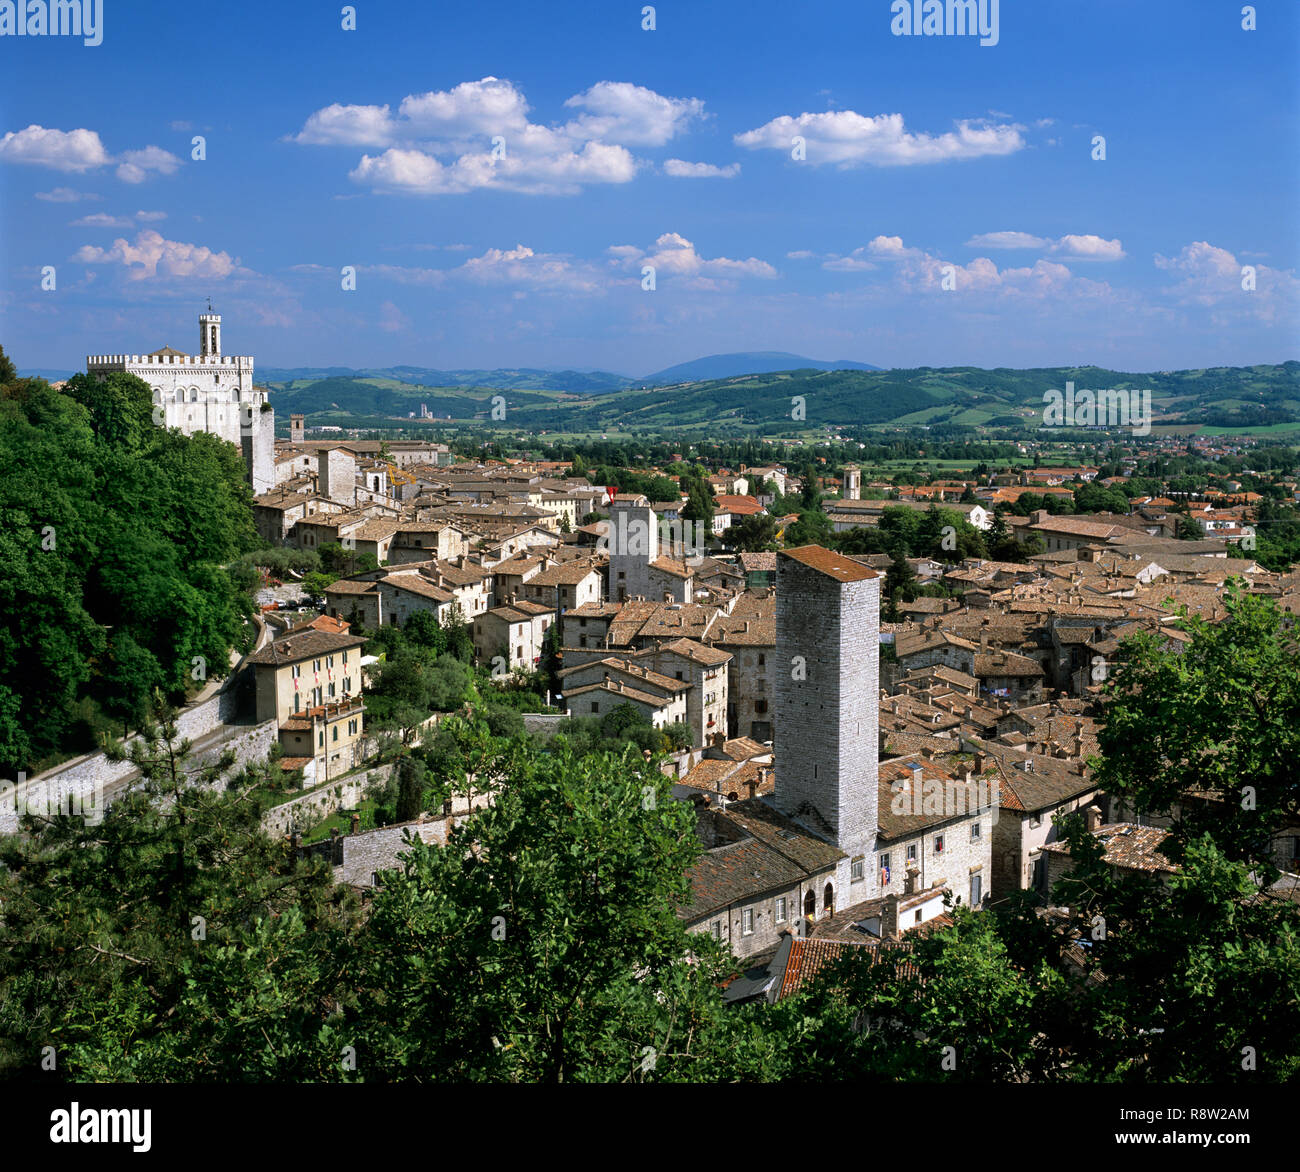 View over old town of Gubbio in June sunlight, Umbria, Italy, Europe Stock Photo